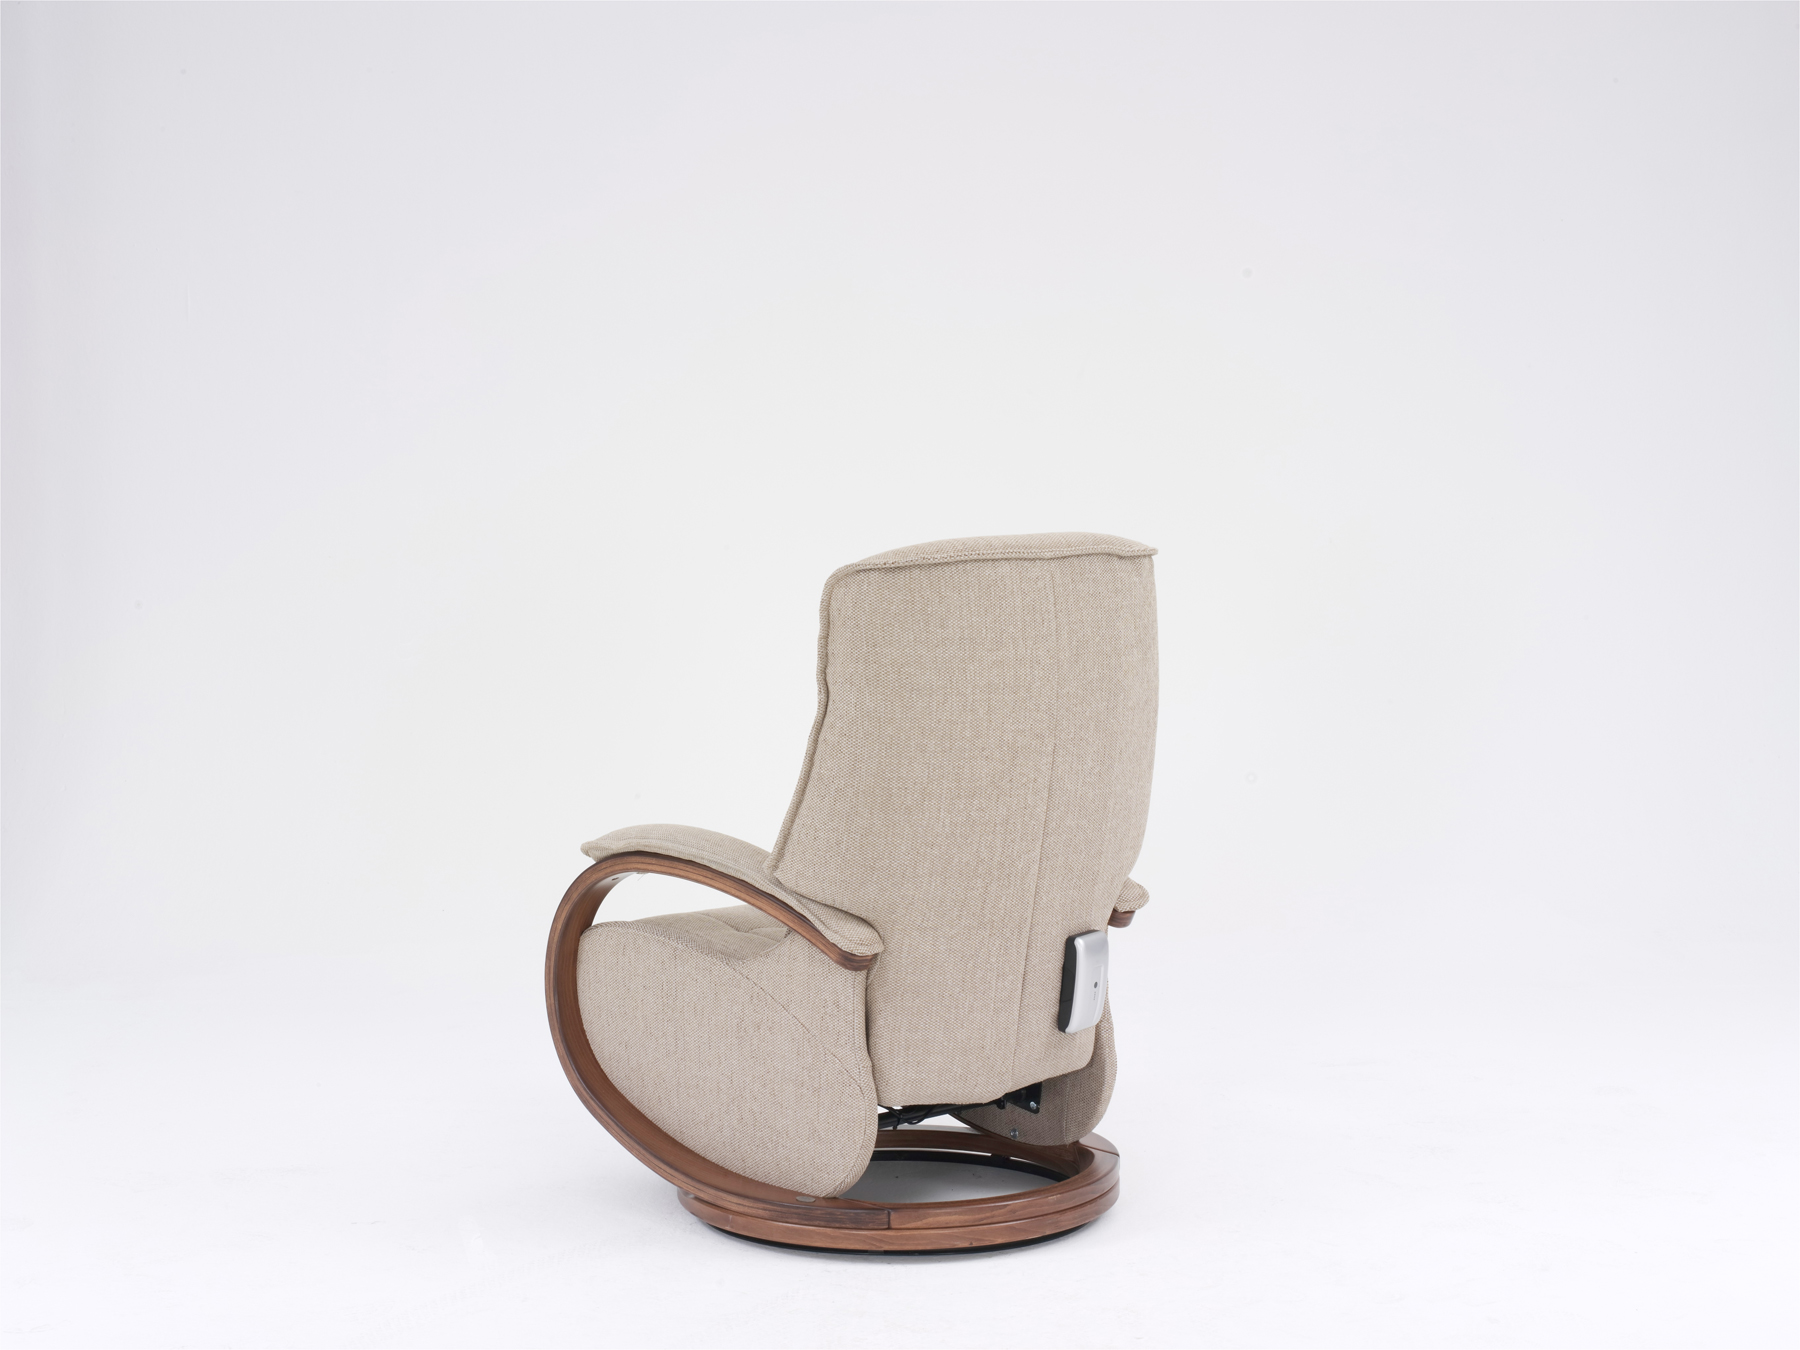 HIMOLLA MOSEL FABRIC CHAIR REAR VIEW